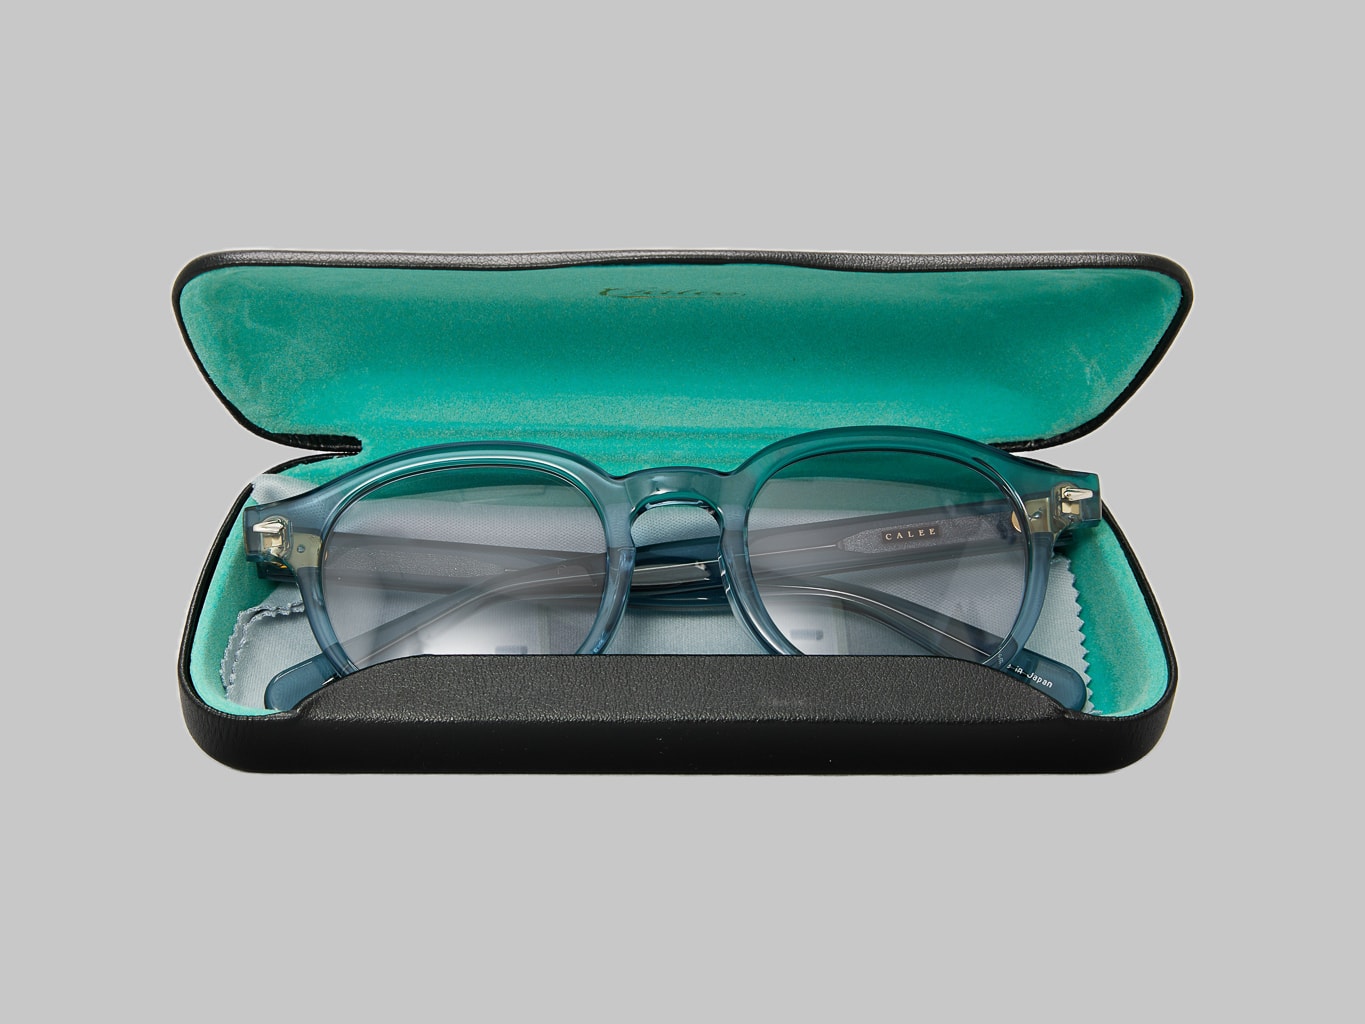 Calee Type Glasses Blue Grey hard sell protective case